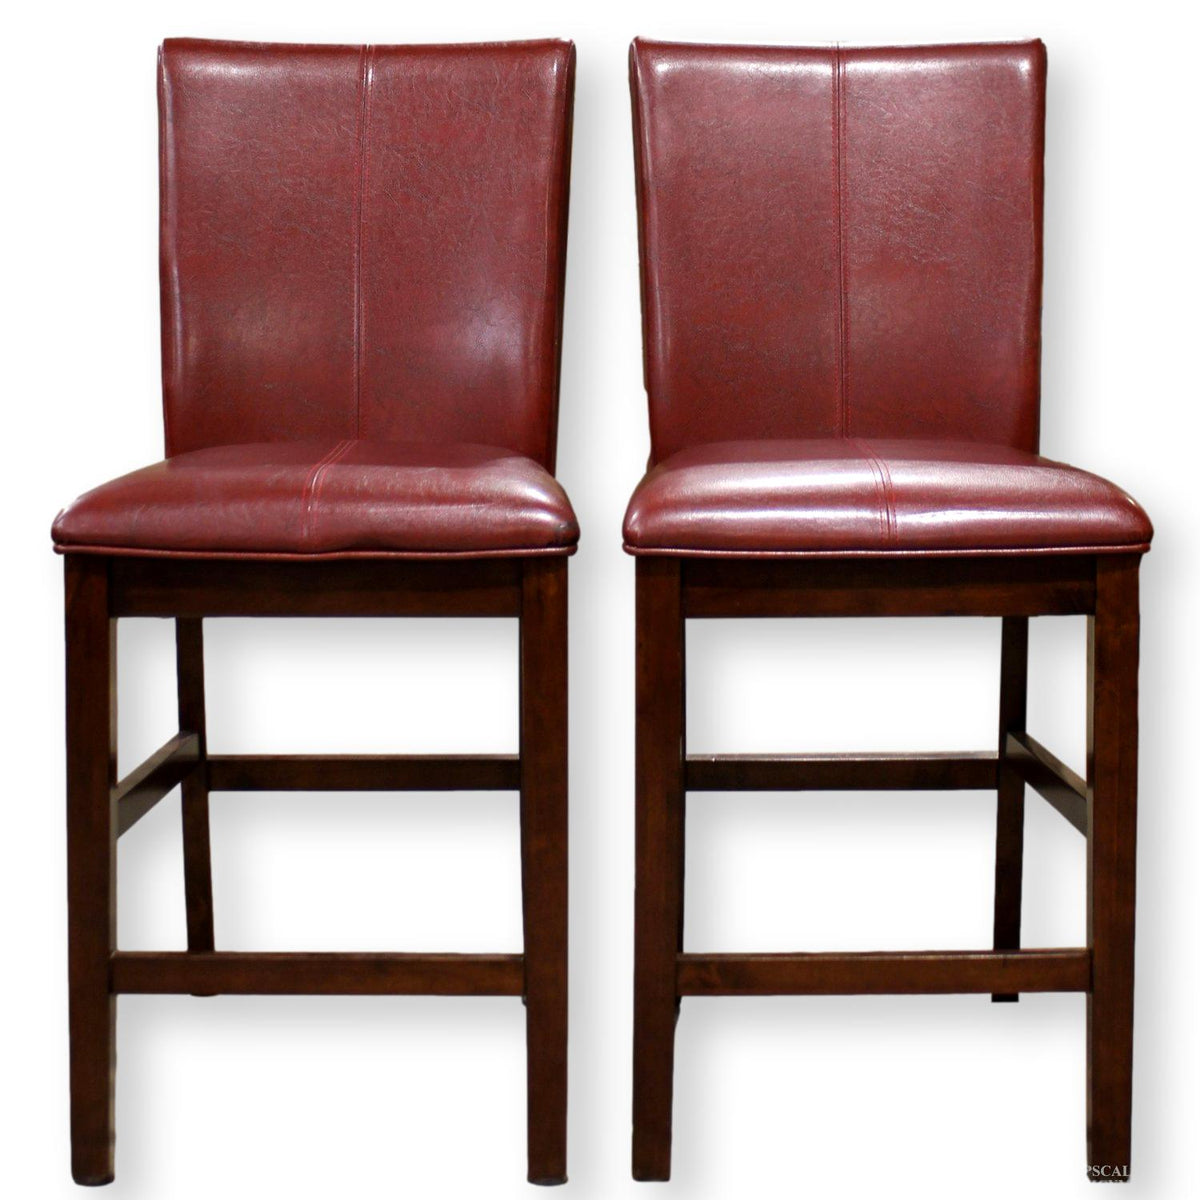 A-America Pair of Cordovan Counter Stools